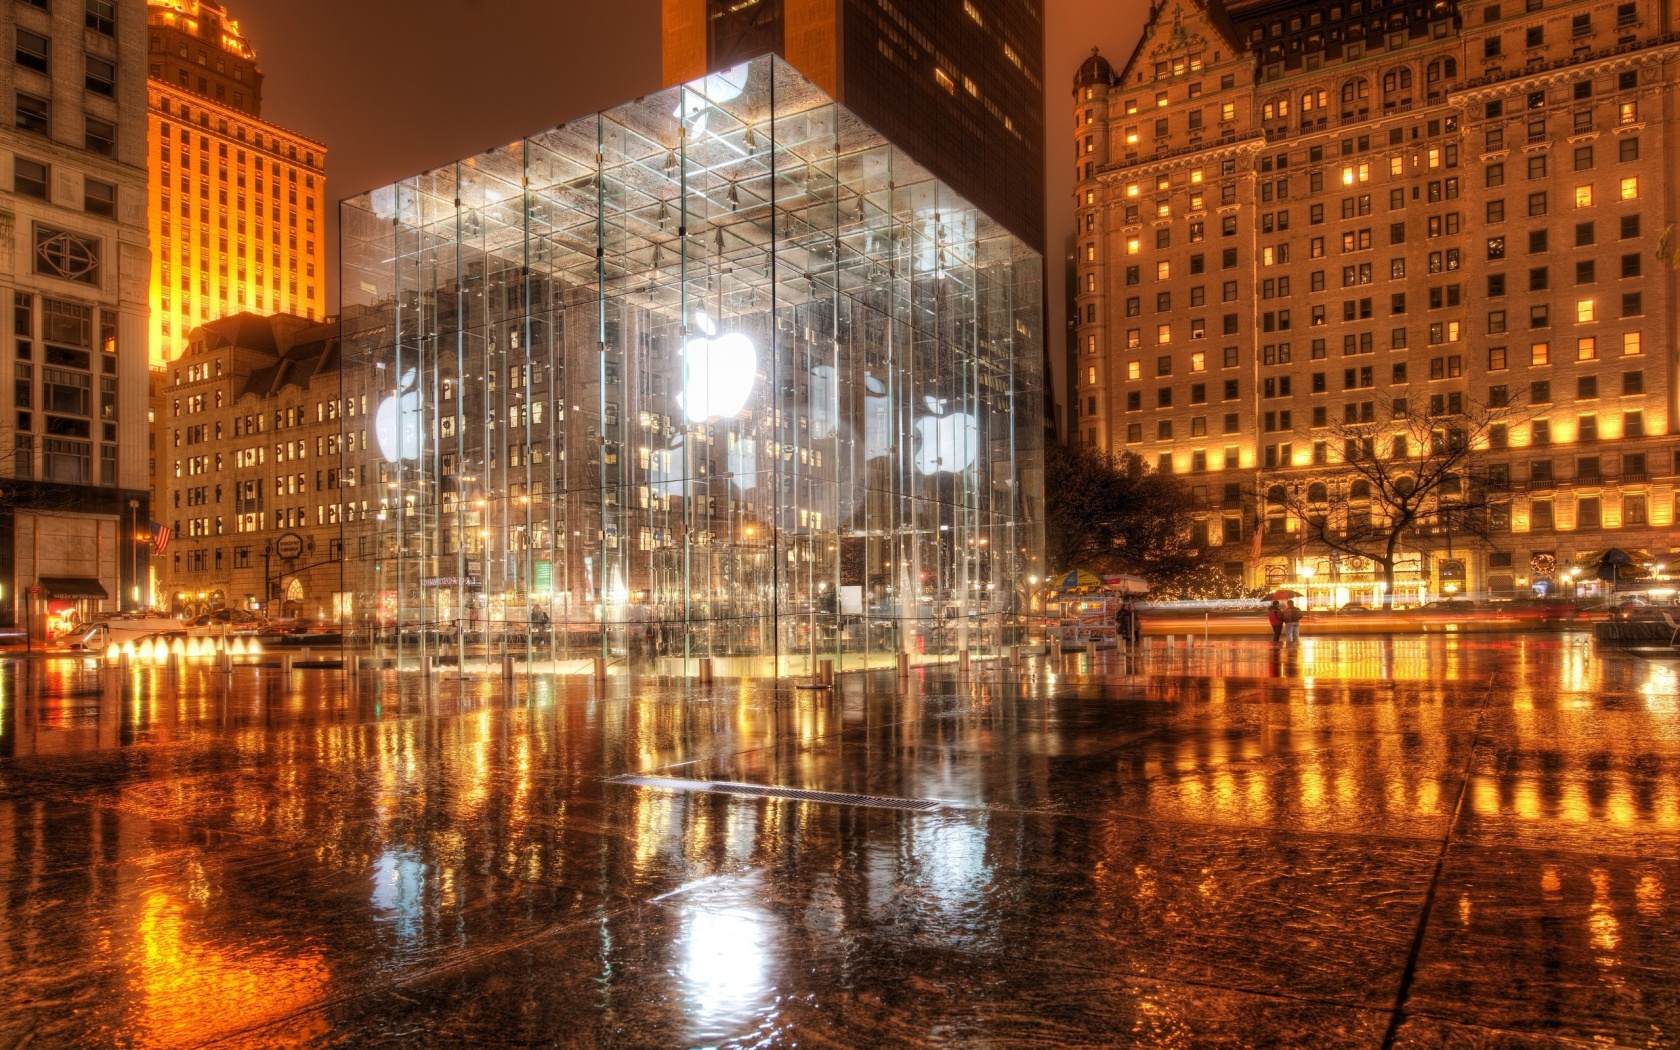 Apple Store At Night Wallpaper Wallpaperz Co